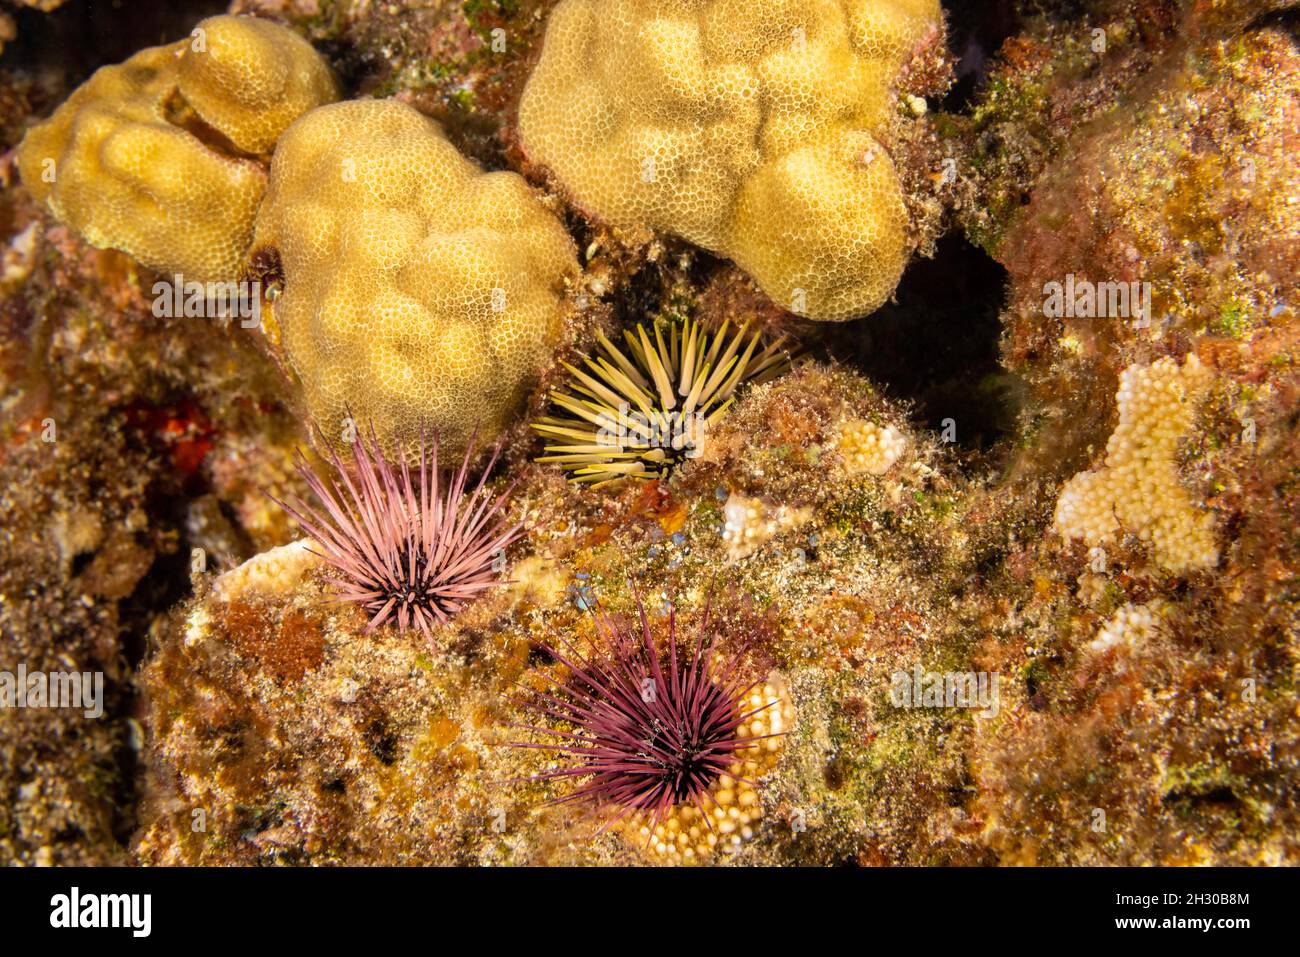 Two species of rock-boring urchin are pictured here. The one with the thick spines is Echinometra mathaei, also known as a burrowing urchin. The other Stock Photo